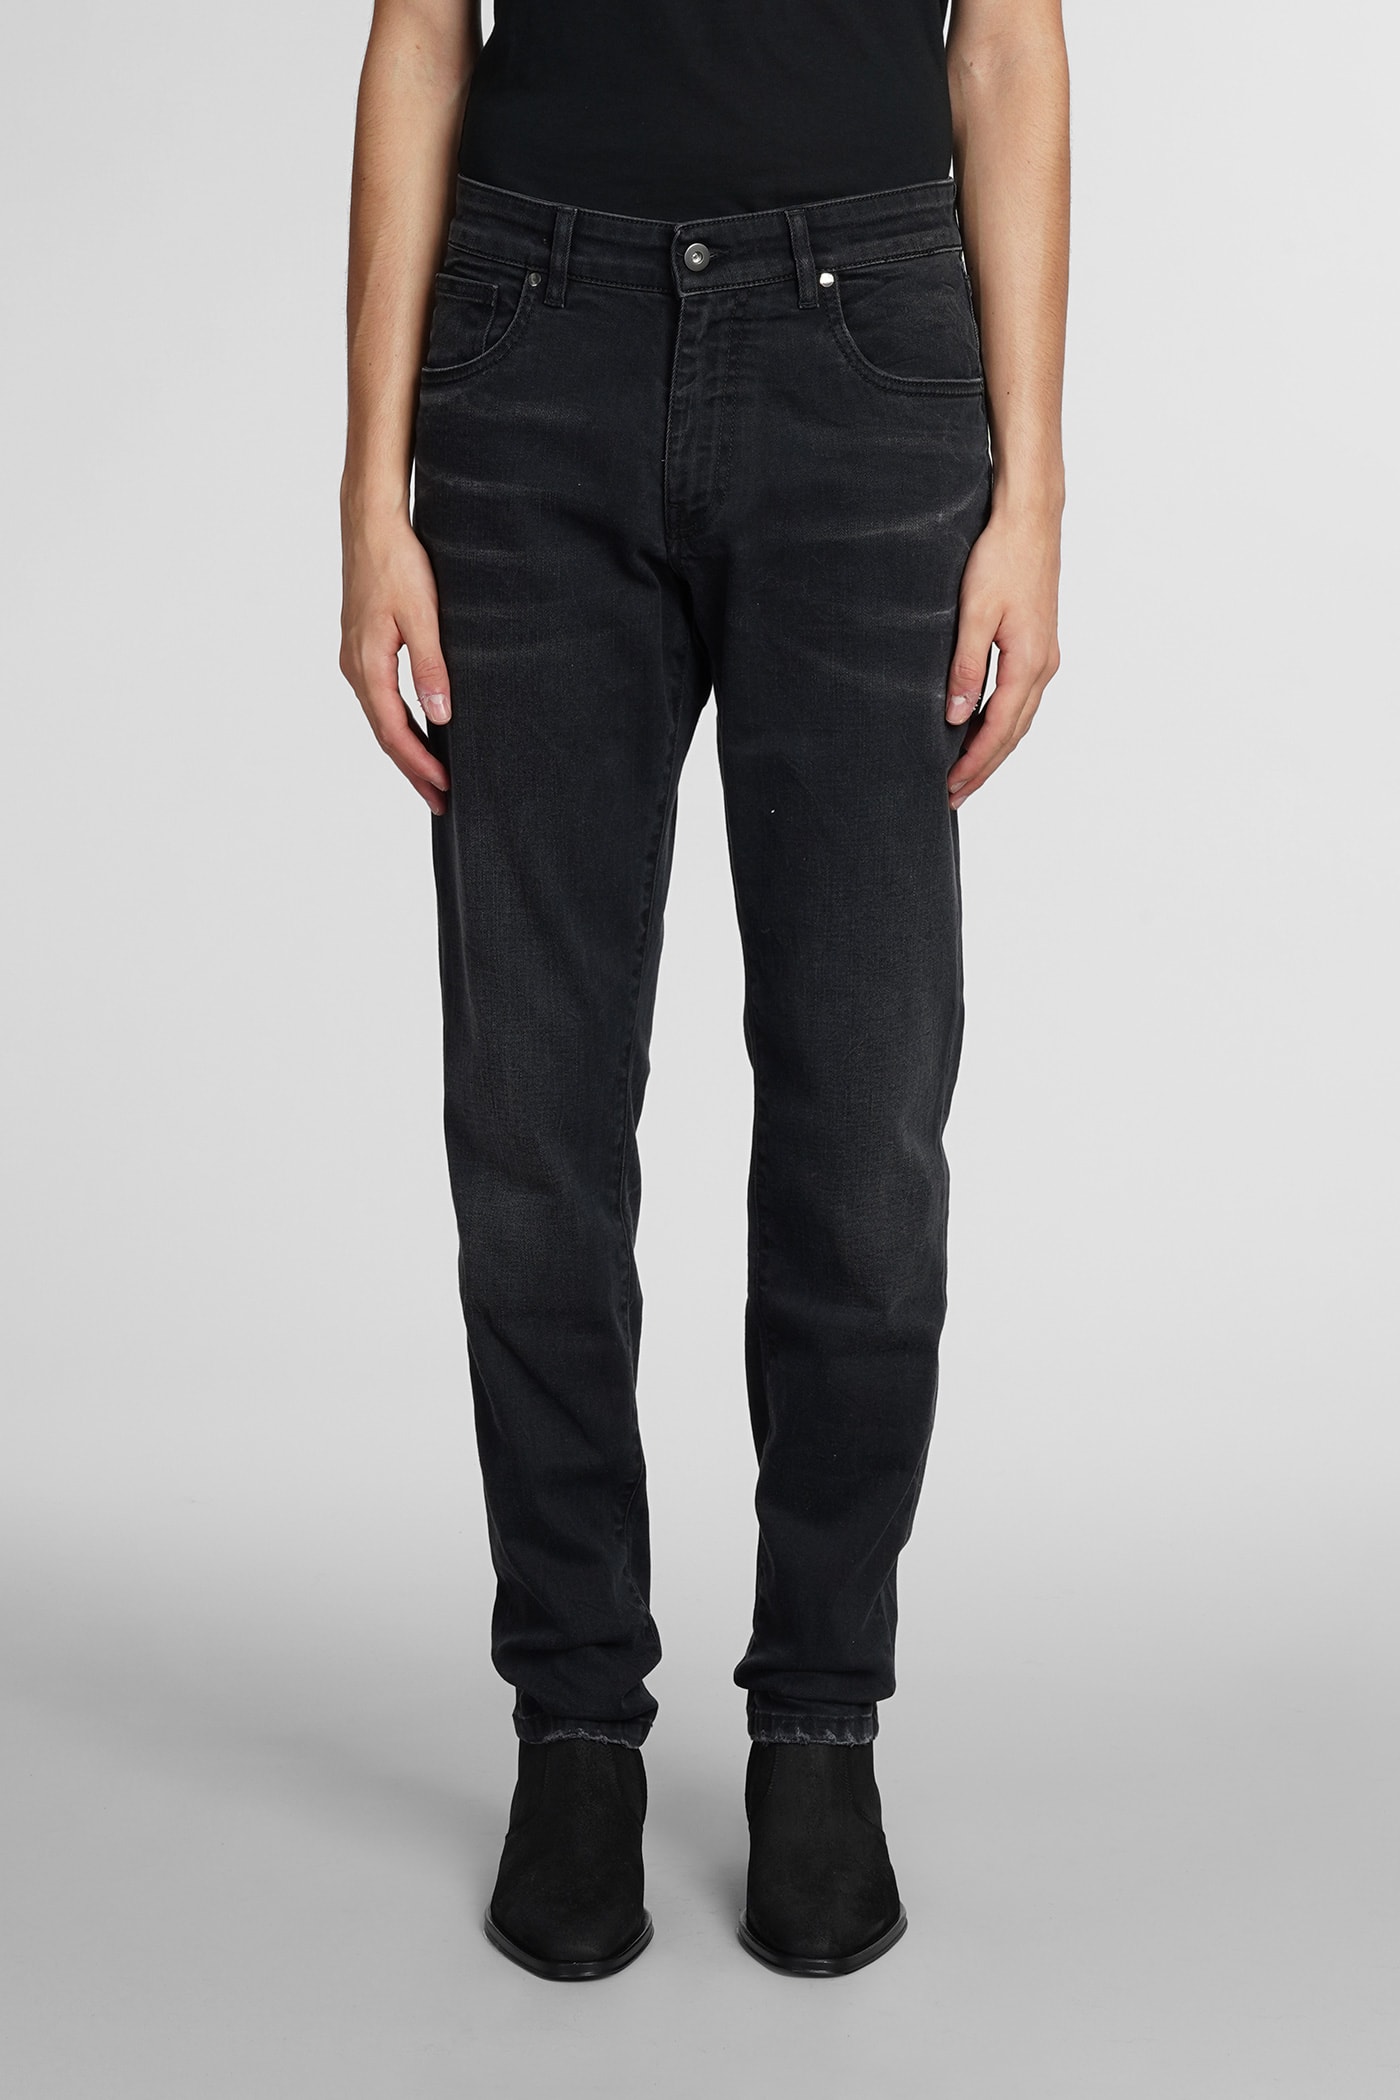 Jeans In Black Cotton